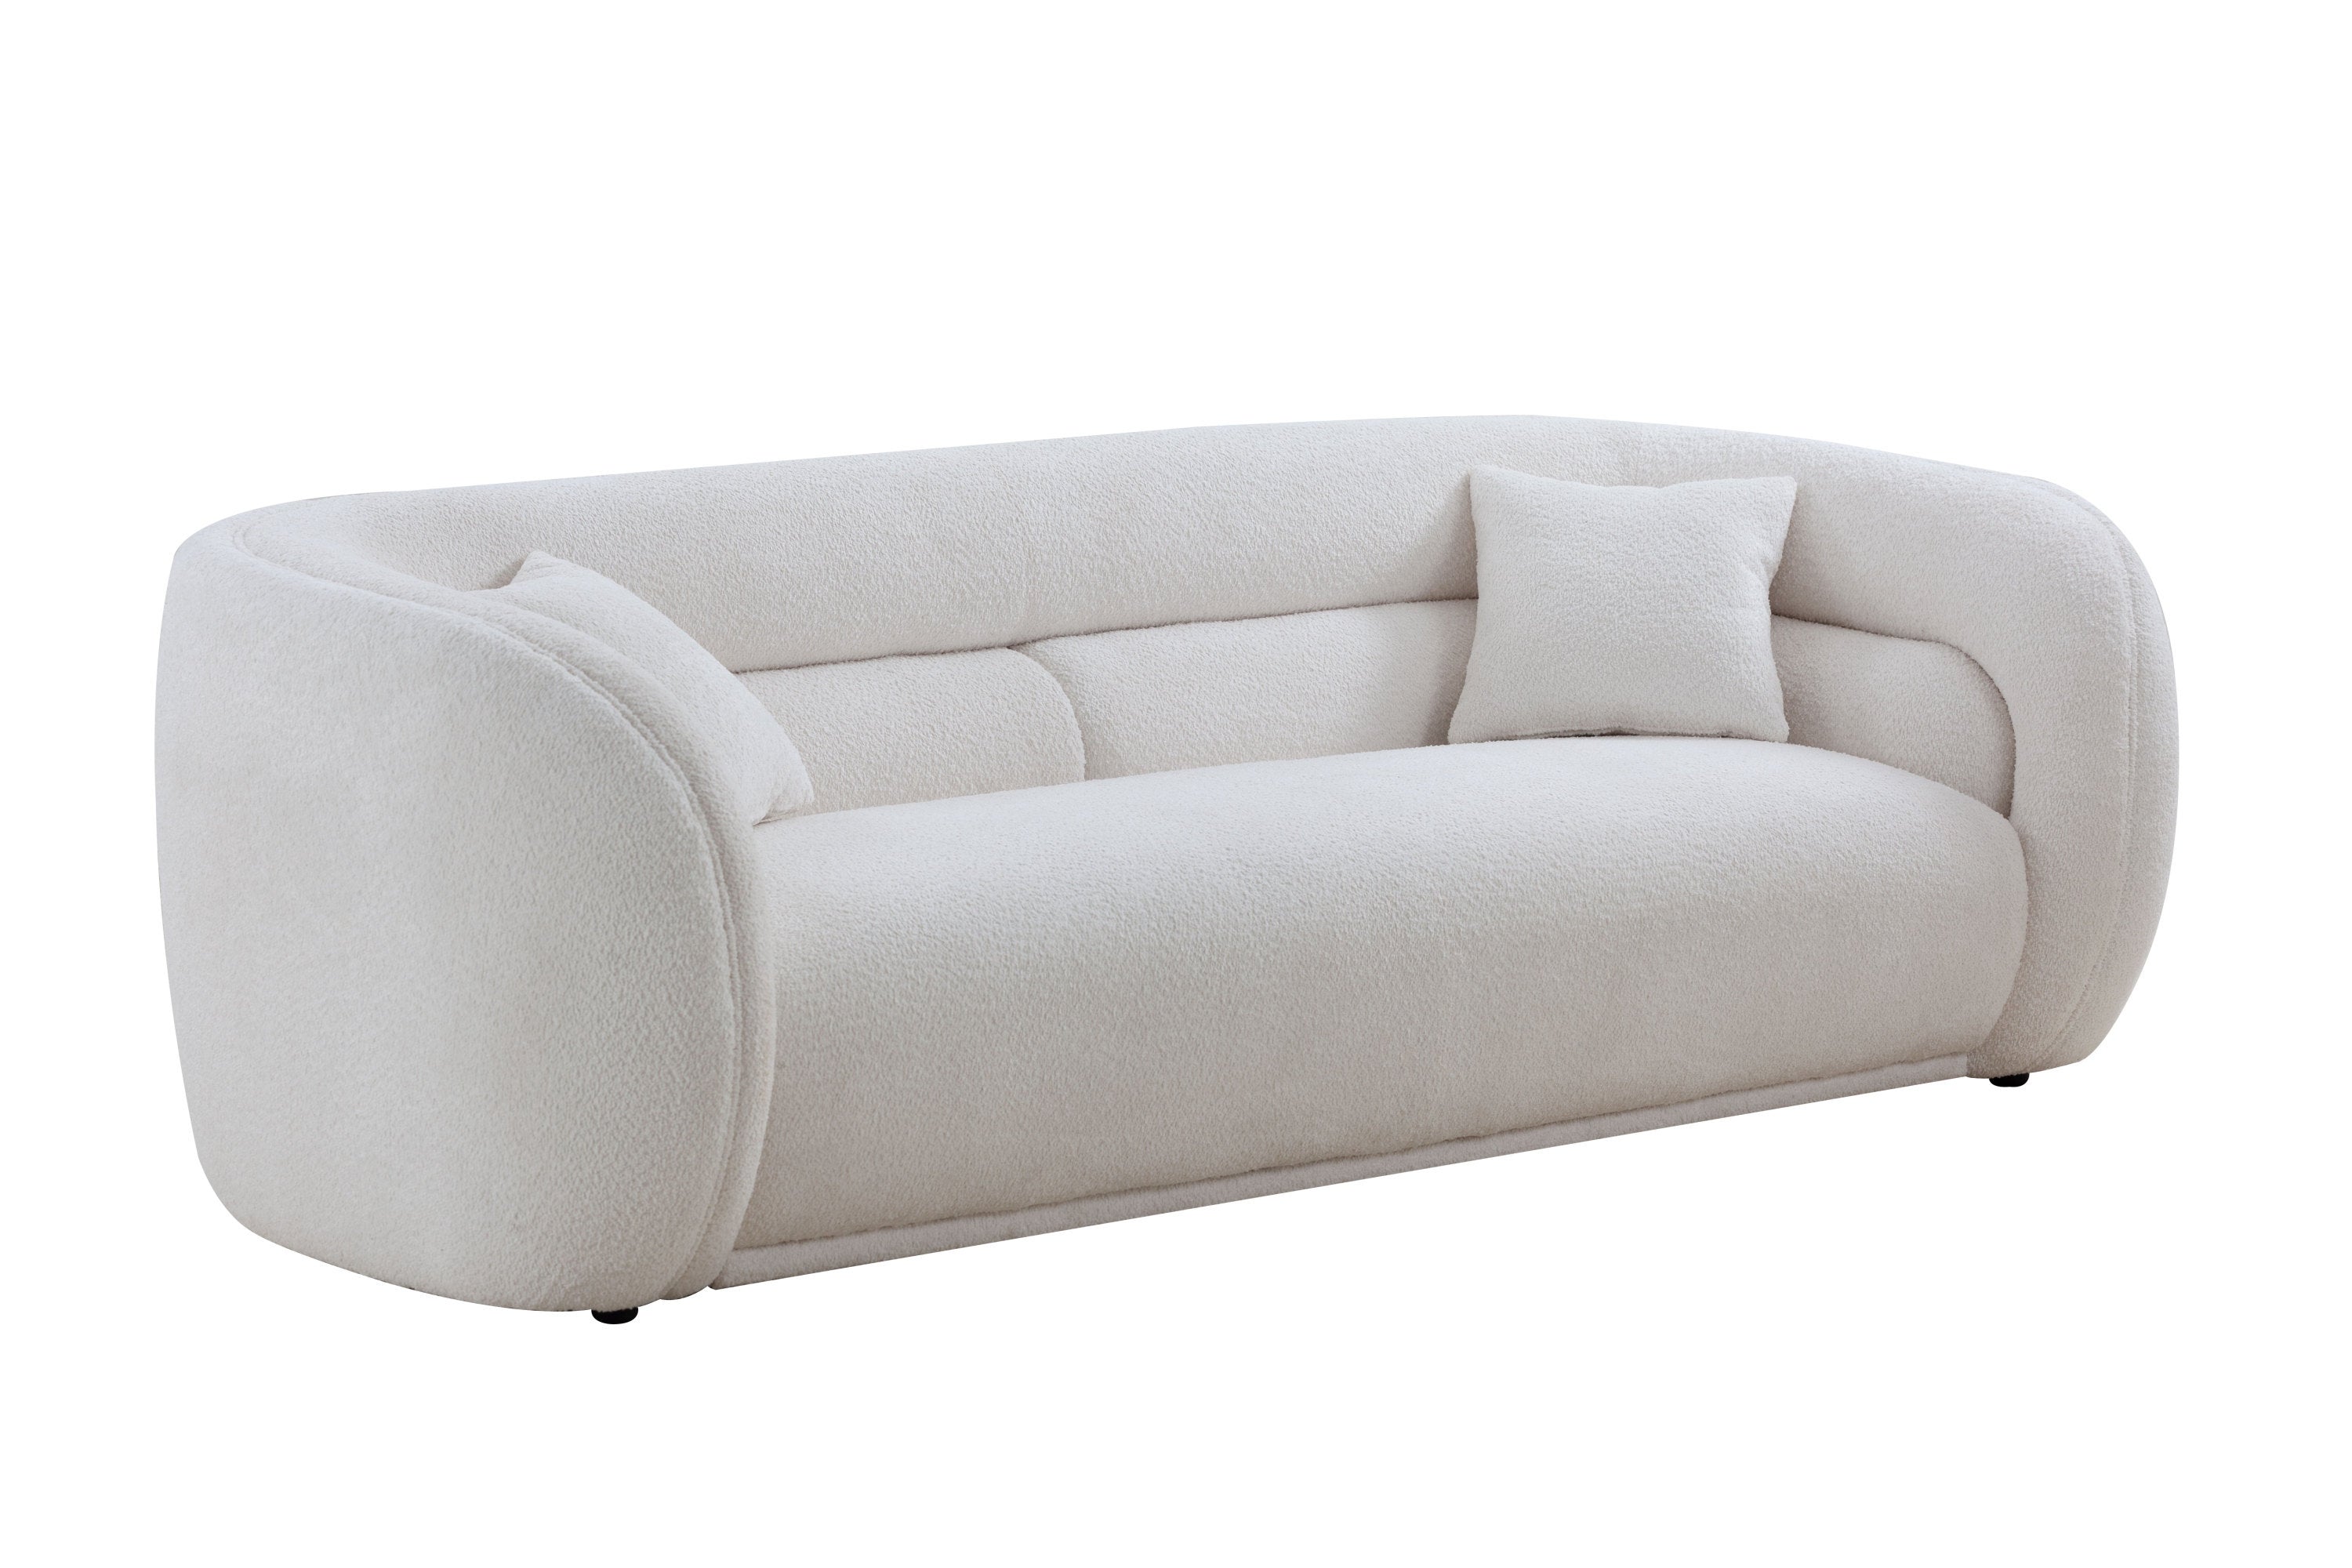  Living Room Lounge Couches Boucle Sofa Sleeper